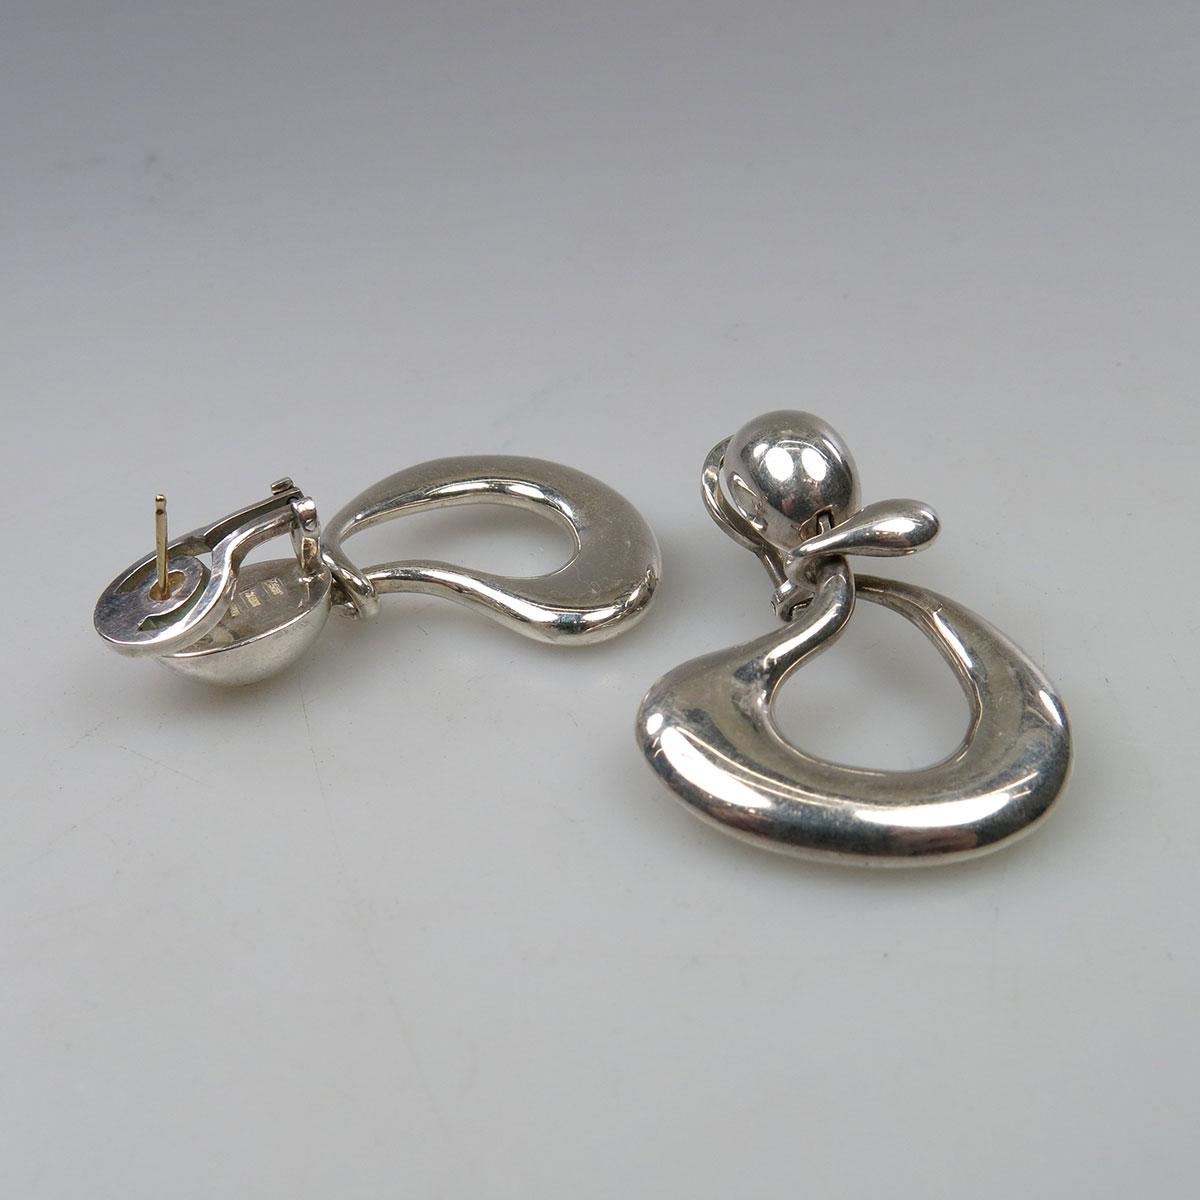 Pair Of Tane Mexican Sterling Silver Drop Earrings